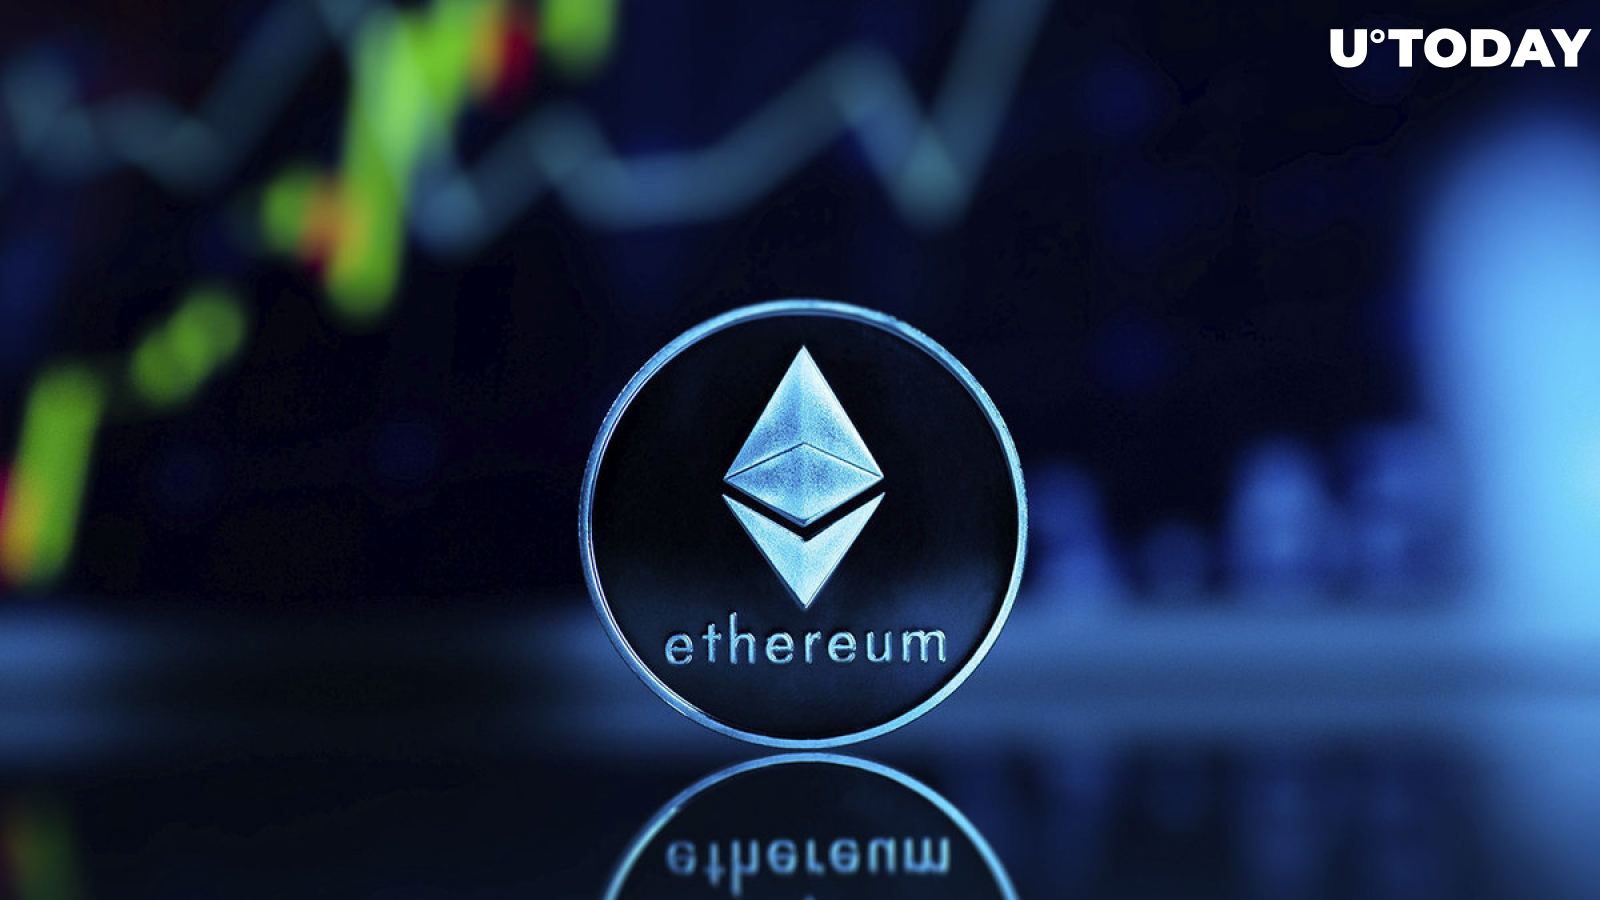 Real Reason Behind Ethereum's Underperformance Explained by Analyst